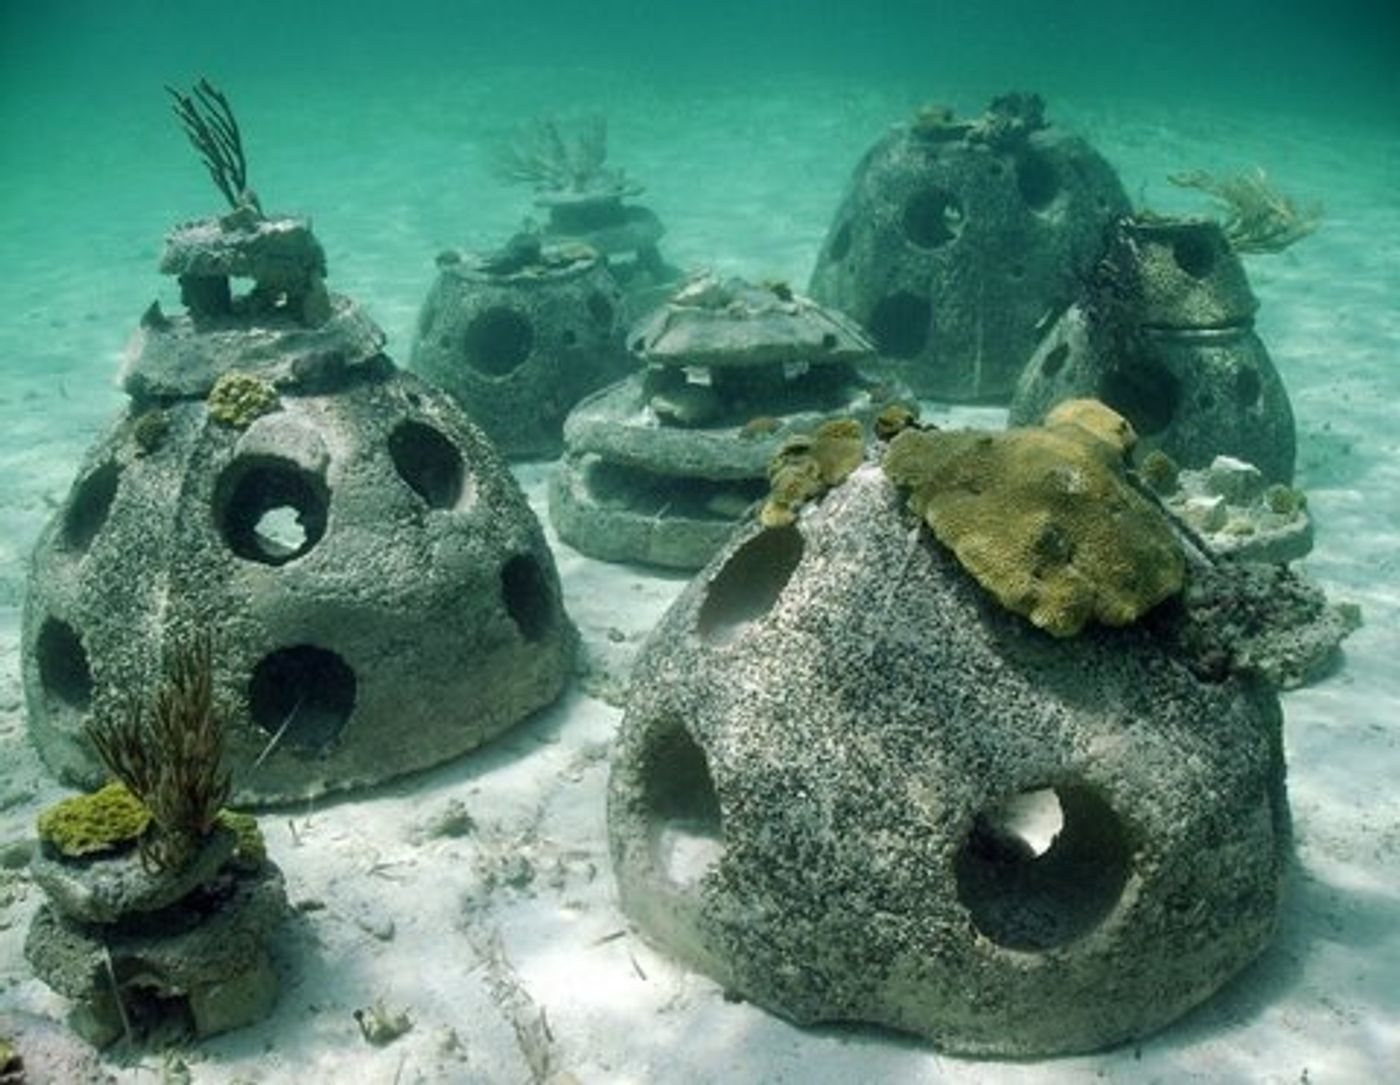 I also saw these unique "reef ball" structures while snorkeling. They were filled with fish and corals. Photo: Reef Ball Foundation